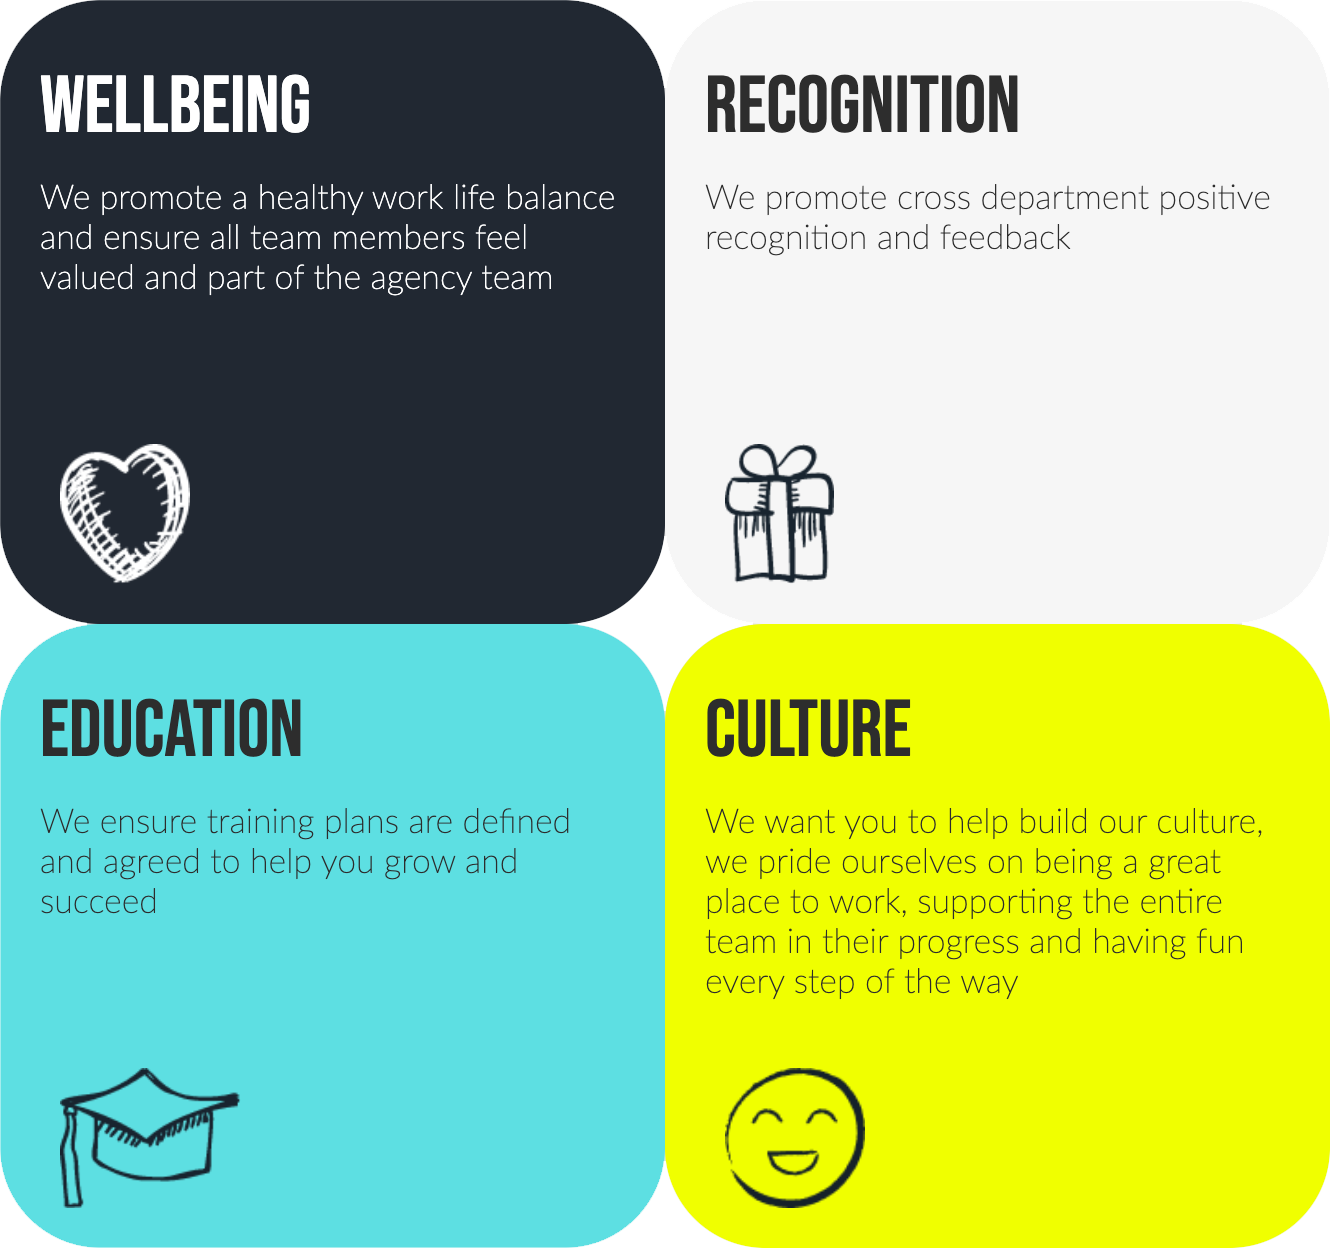 Wellbeing, recognition, education and culture